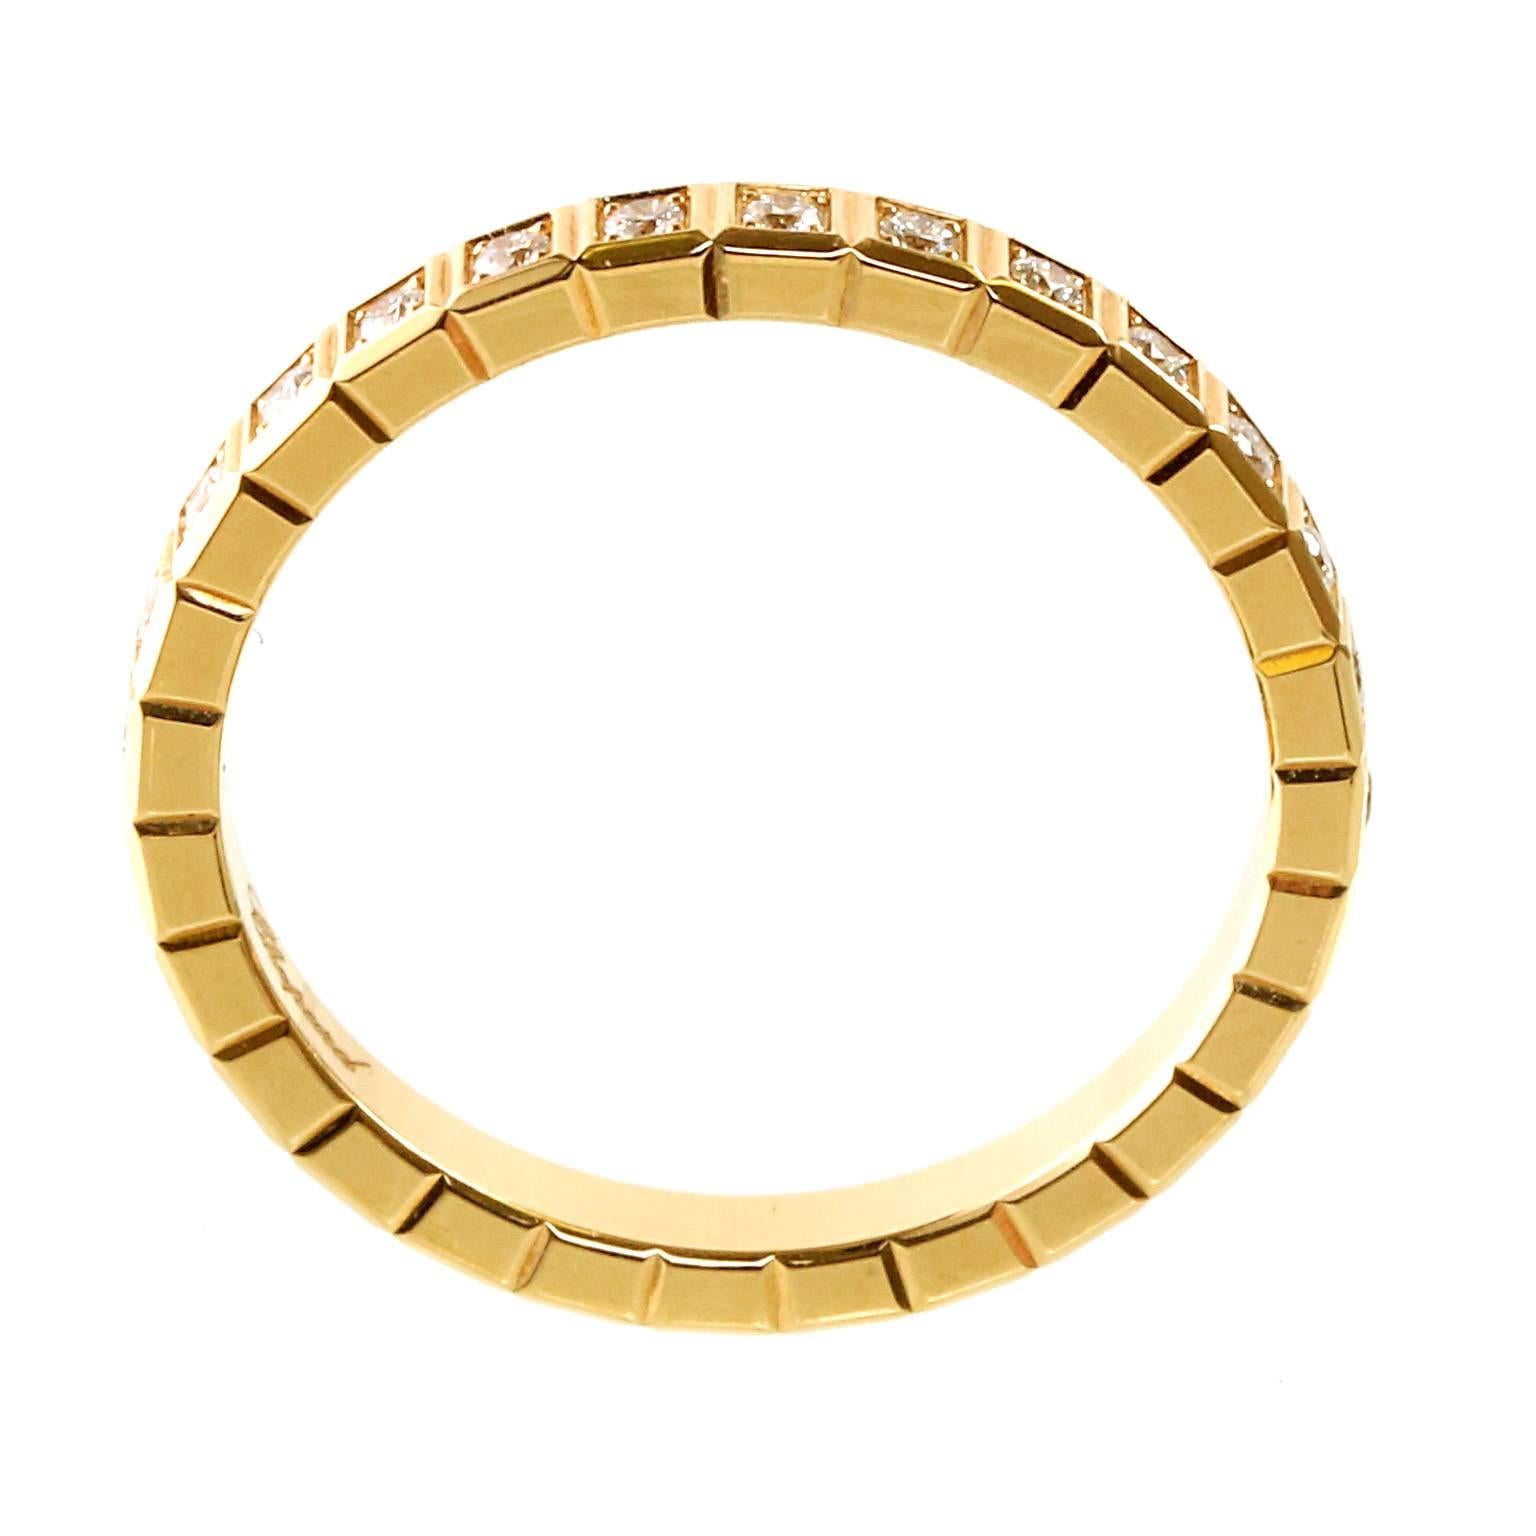 A beautiful 18kt yellow gold Chopard Eternity diamond ring featuring an Ice Cube designed adorned with 28 Round Brilliant Cut Diamonds (,31ct) into a brilliant, glittering loop around the entire Band.

Size: 7 1/4 US
Dimensions: The band measures